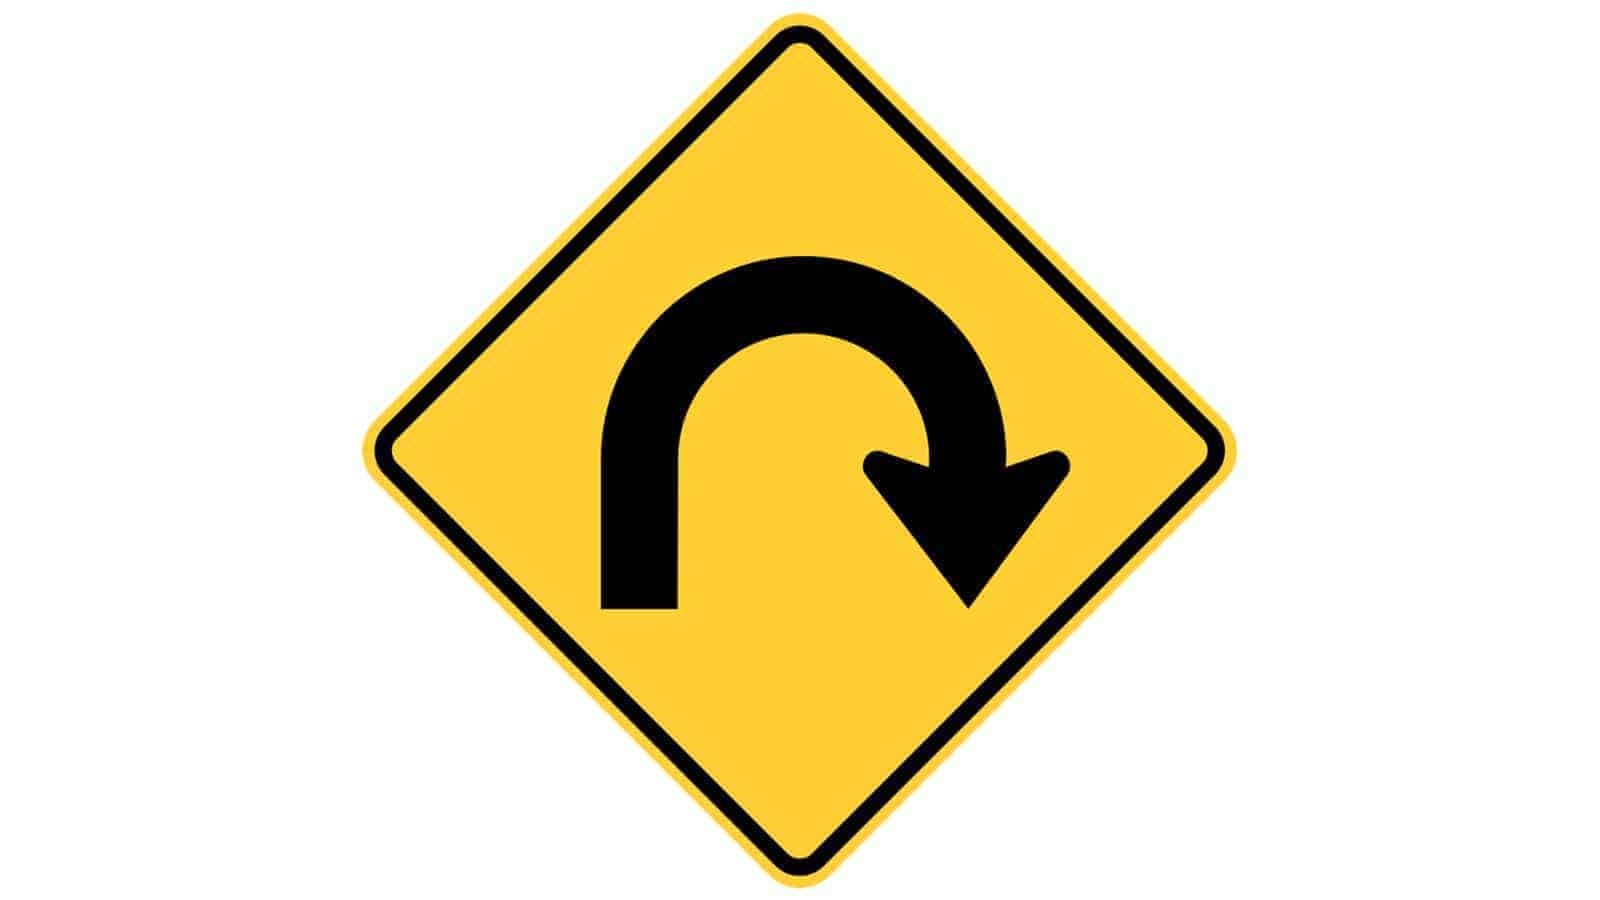 Warning sign Hairpin Curve